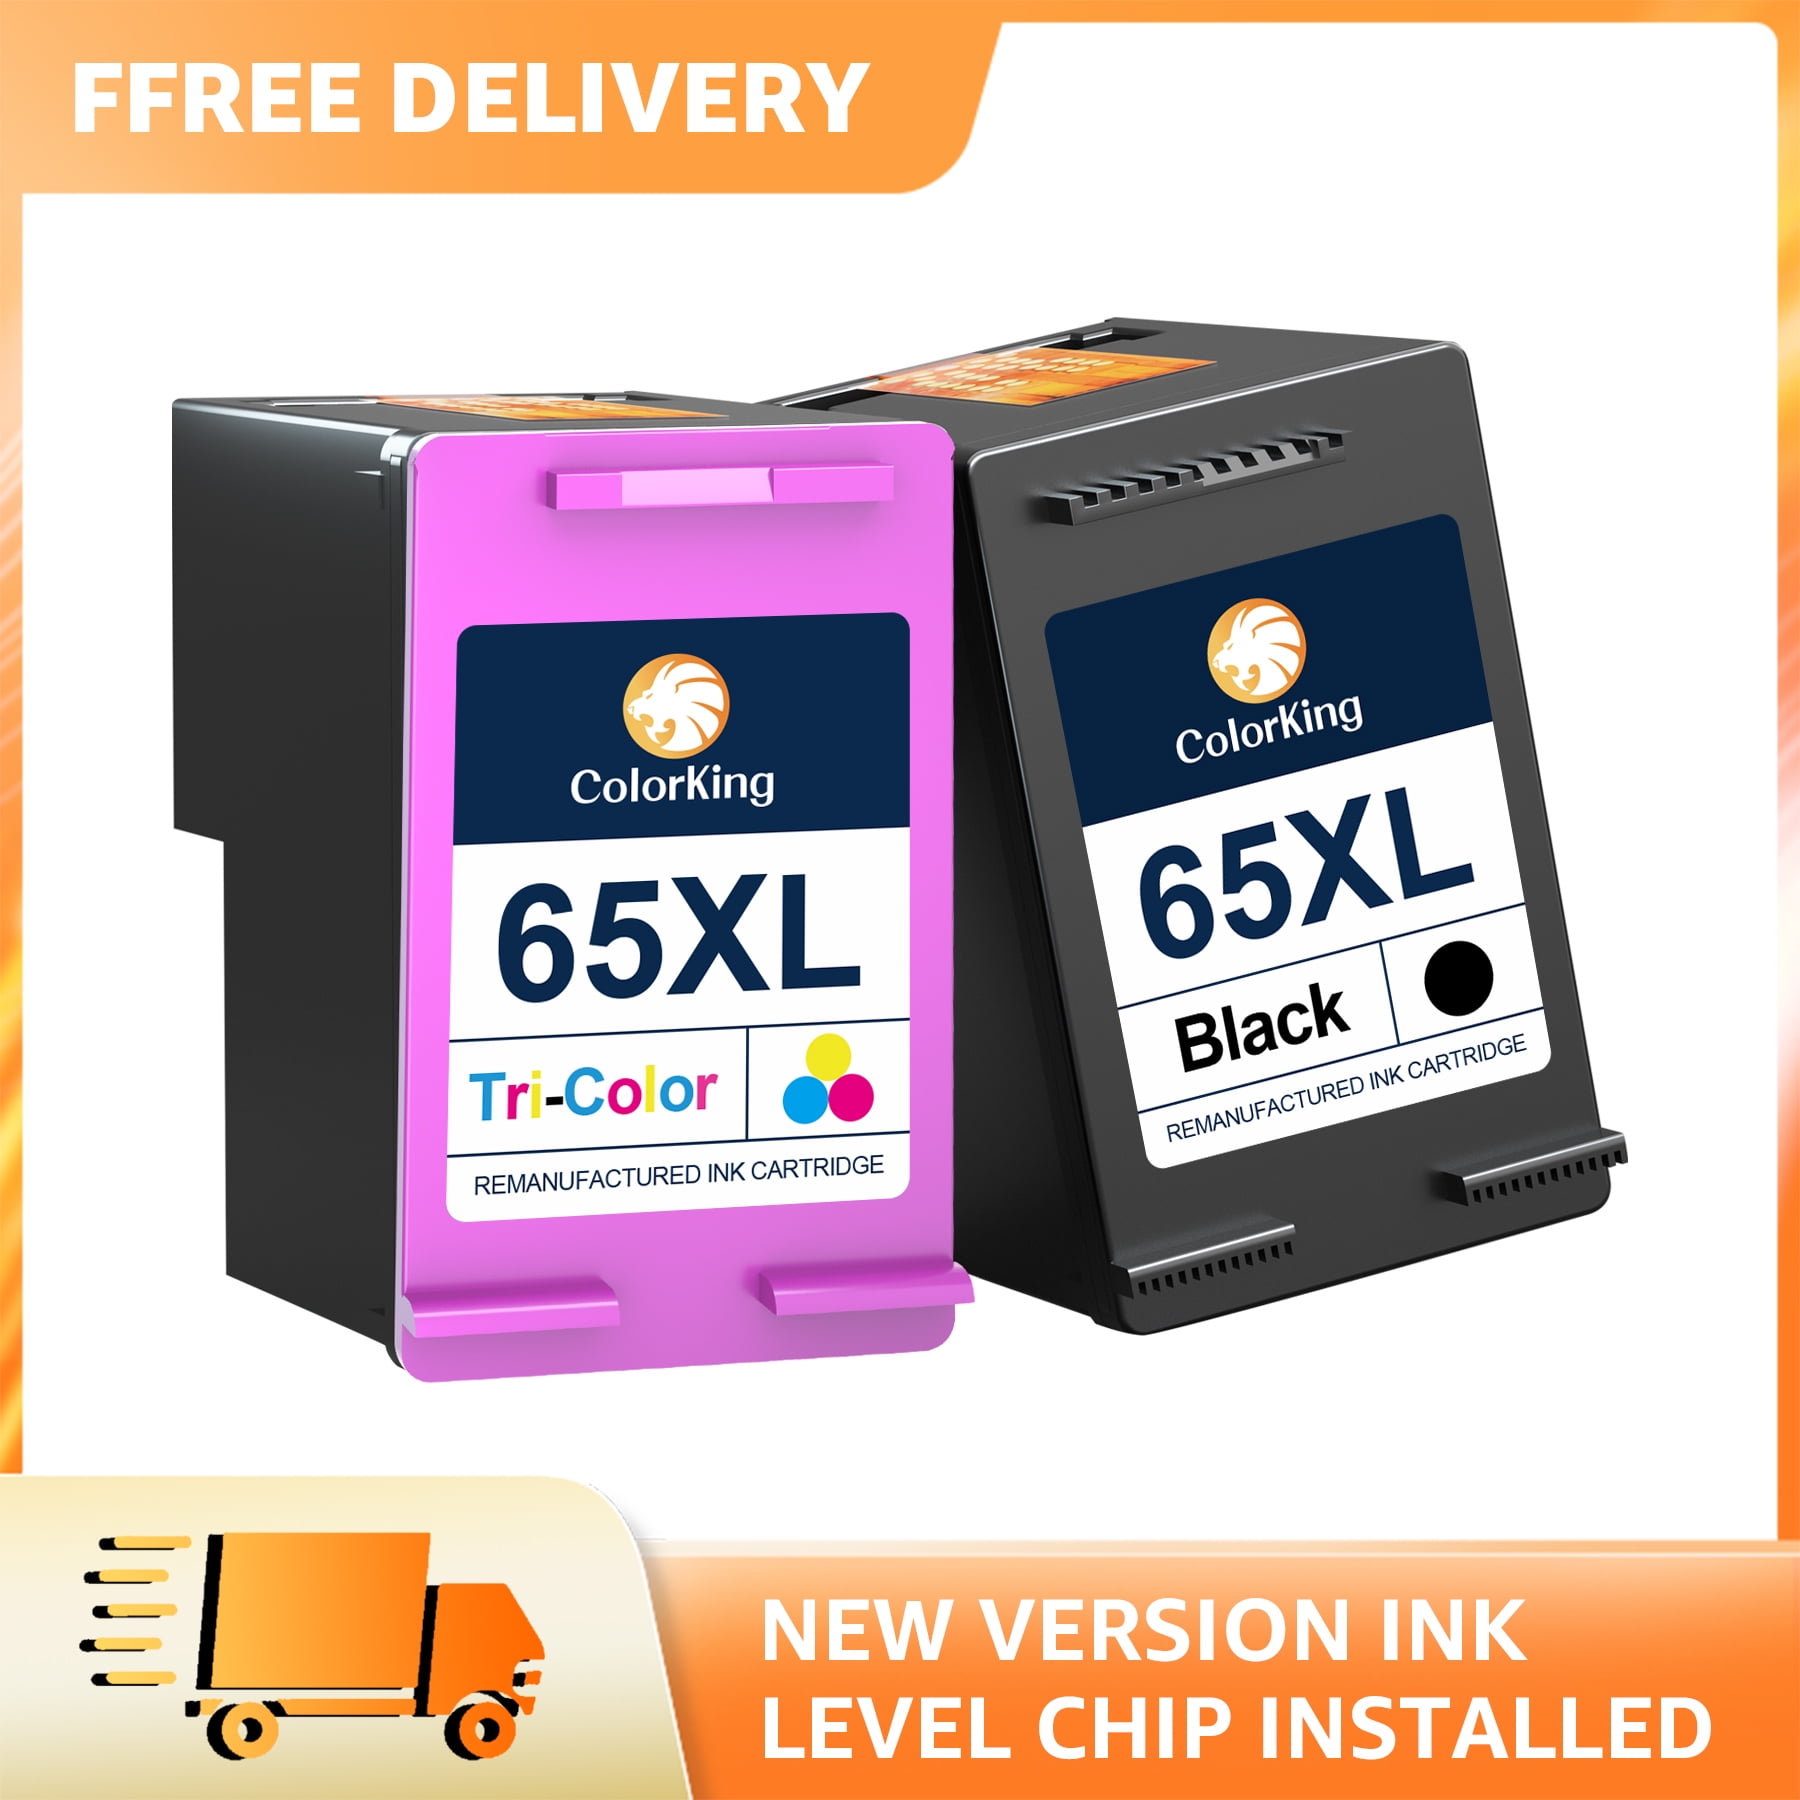 Colorking 65XL Cartridges Replacement for HP Printer Ink 65 Black and Color to Use with Deskjet 2622 2624 2652 2655 3720 3722 3723 3732 3758 Envy 5052 5058 (2 Pack) Walmart.com